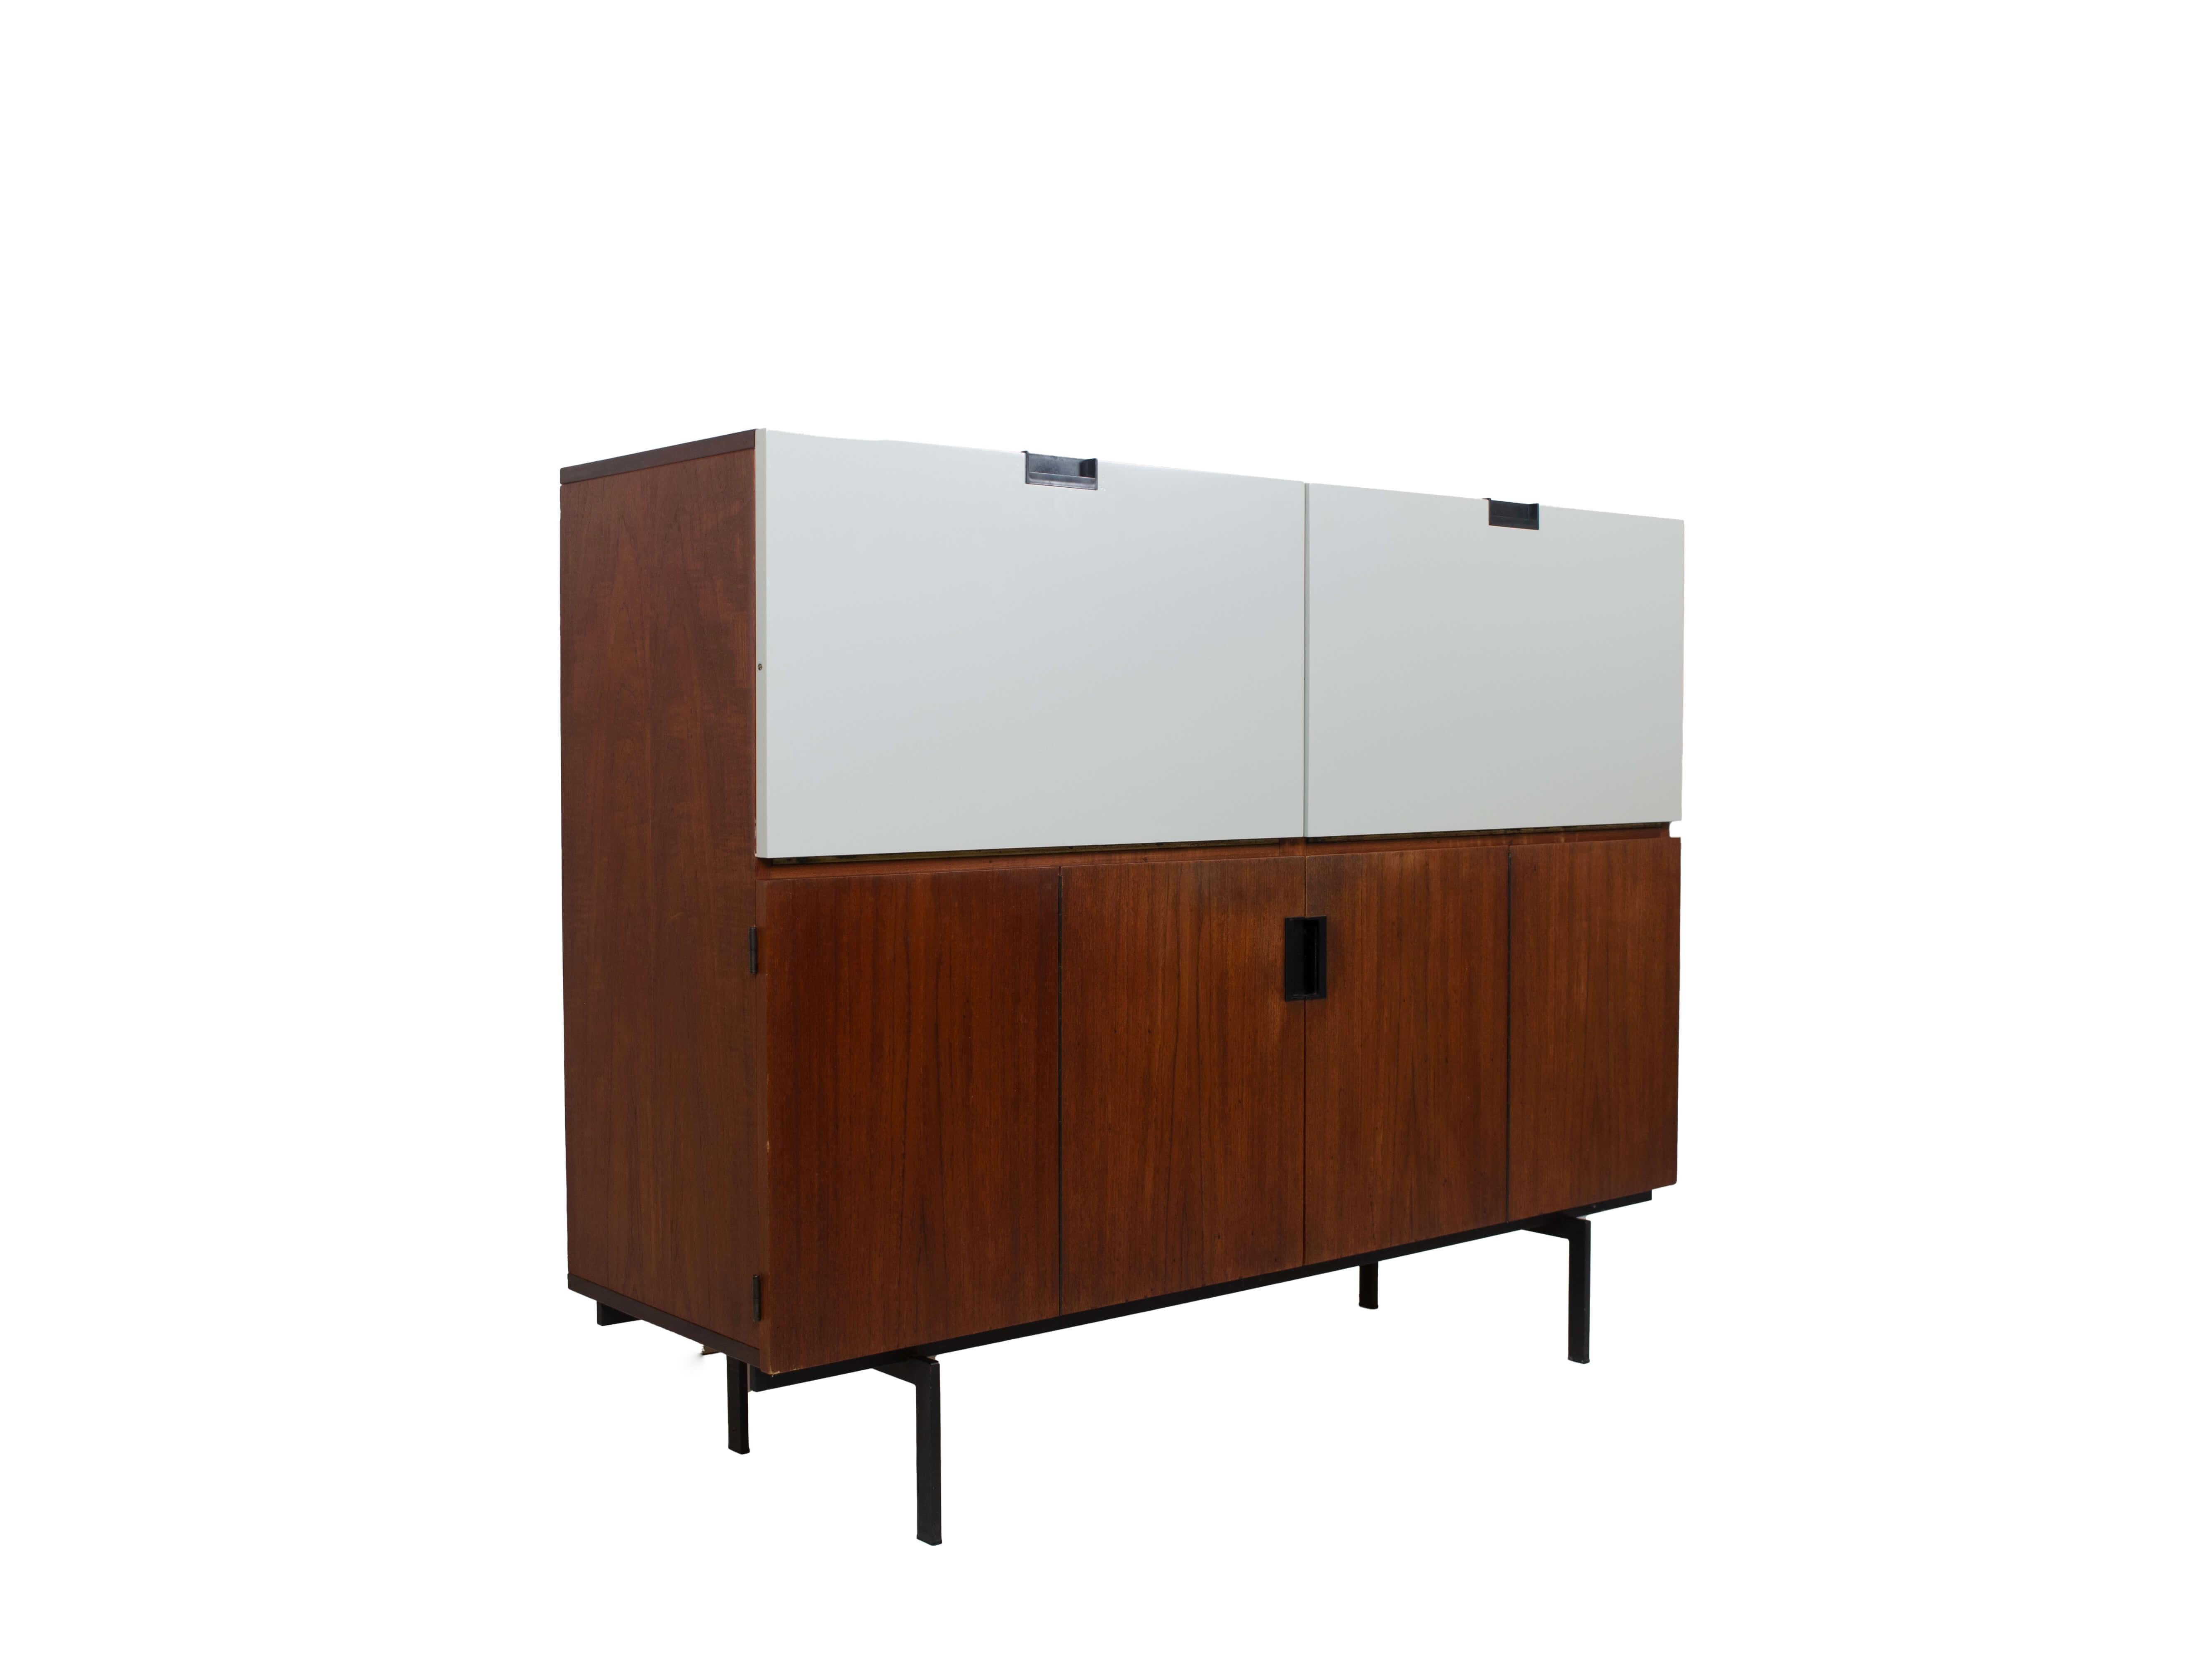 Impressive Cees Braakman pastoe cabinet from the Japanese Series CU-07, the Netherlands 1960s. This example of Dutch Design is known for the usage of the off-white formica doors in combination with teak. Iconic are the black handles. This Cabinet